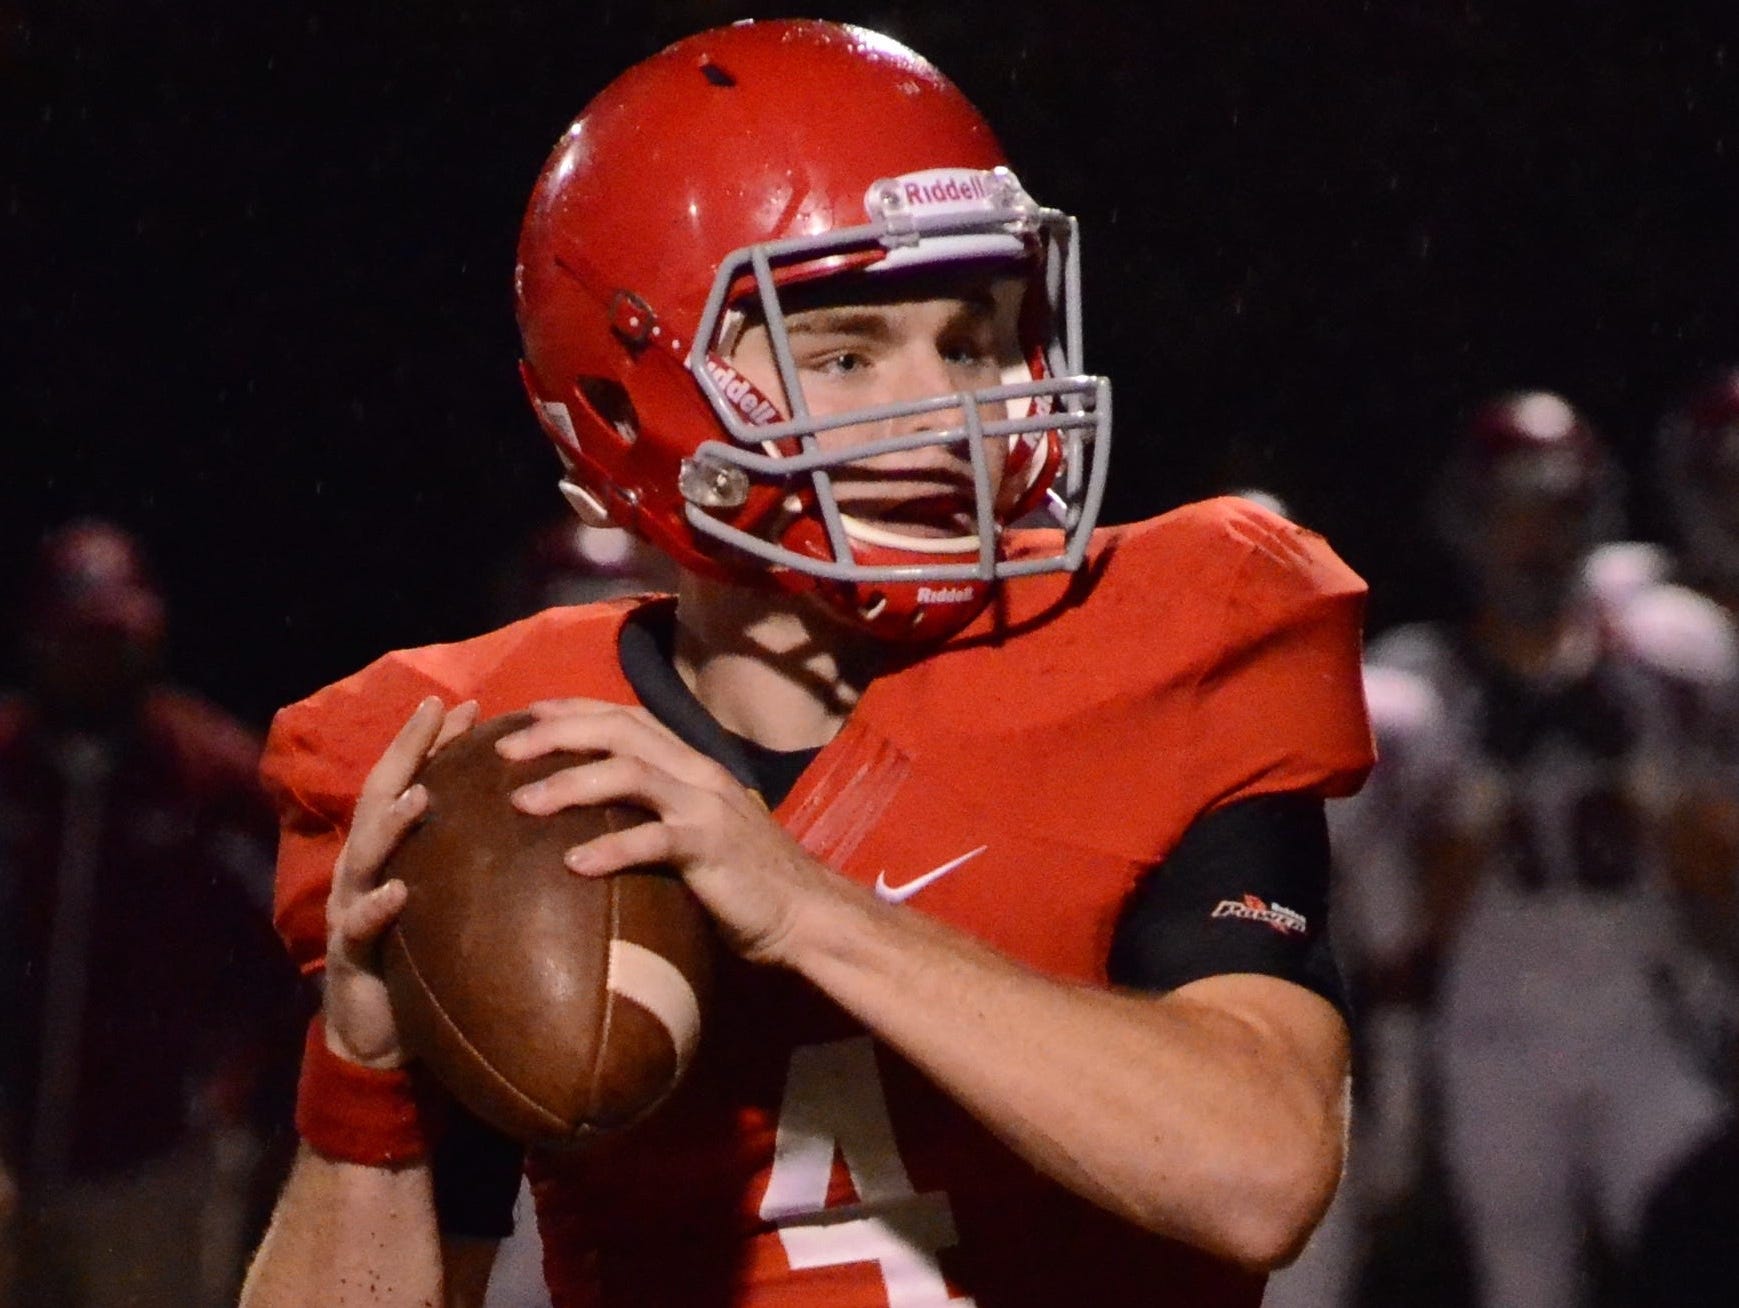 Brentwood Academy's Jeremiah Oatsvall ran for five touchdowns and had 425 yards from scrimmage, including 253 yards passing against MBA on Friday.